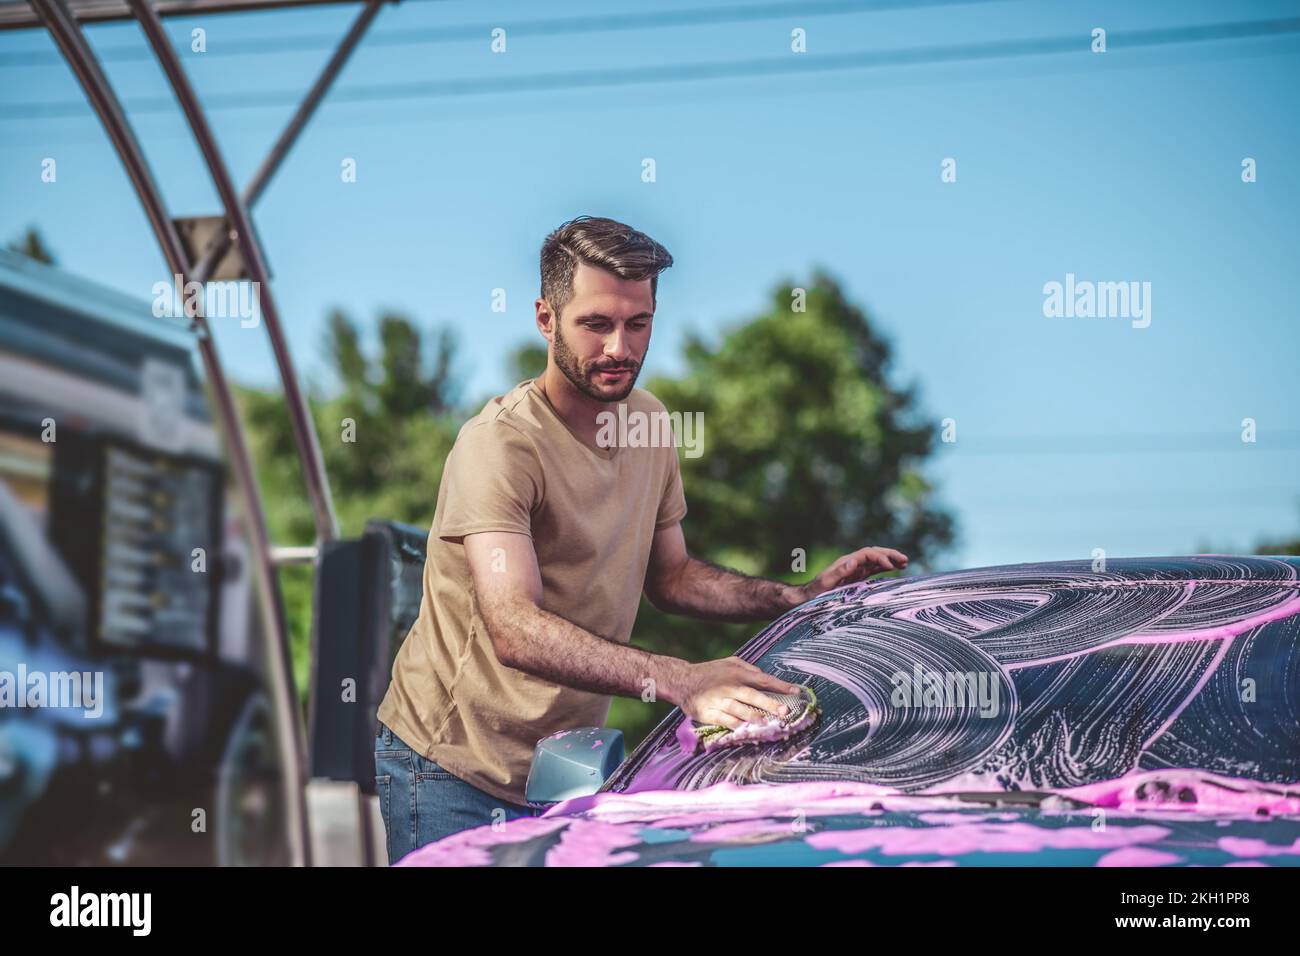 Service station worker cleaning an automobile windshield outdoors Stock Photo